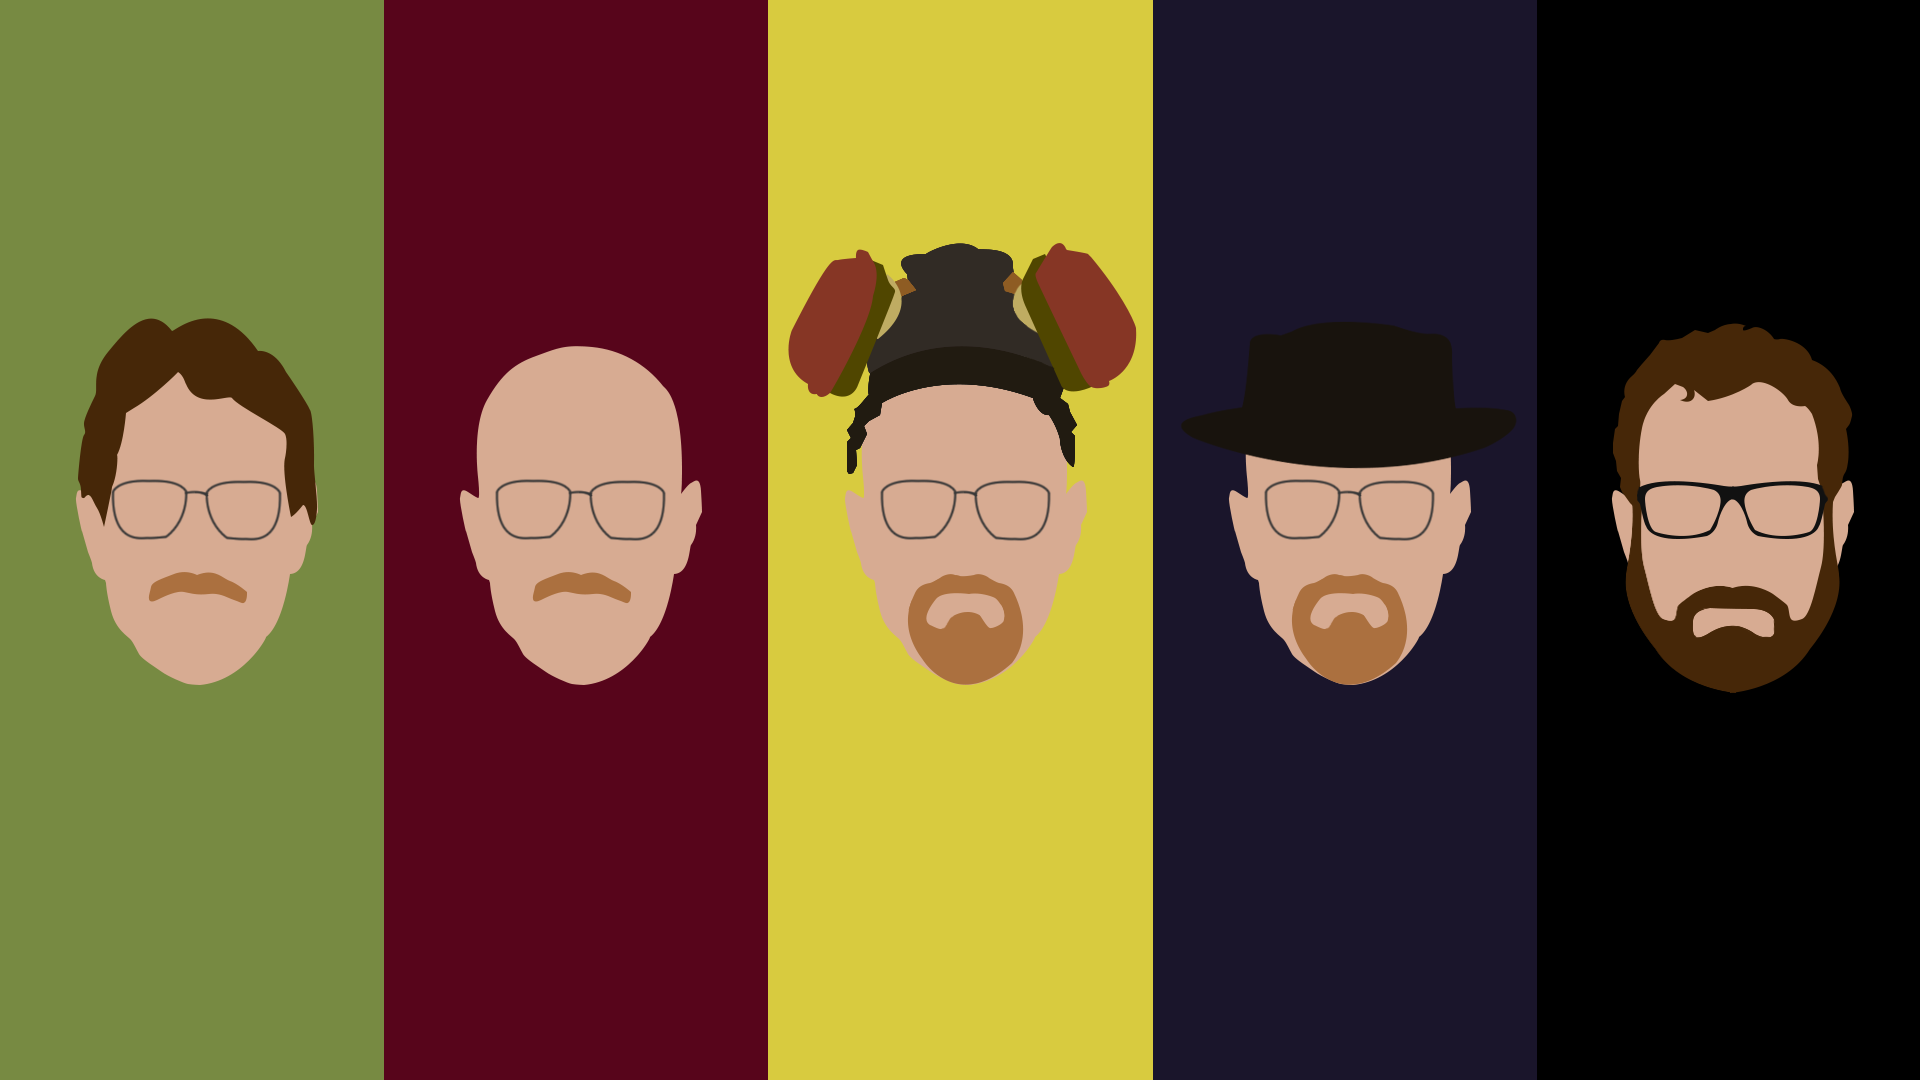 I made this minimalist wallpaper The Faces of Walter White. Hope you enjoy [1920x1080]